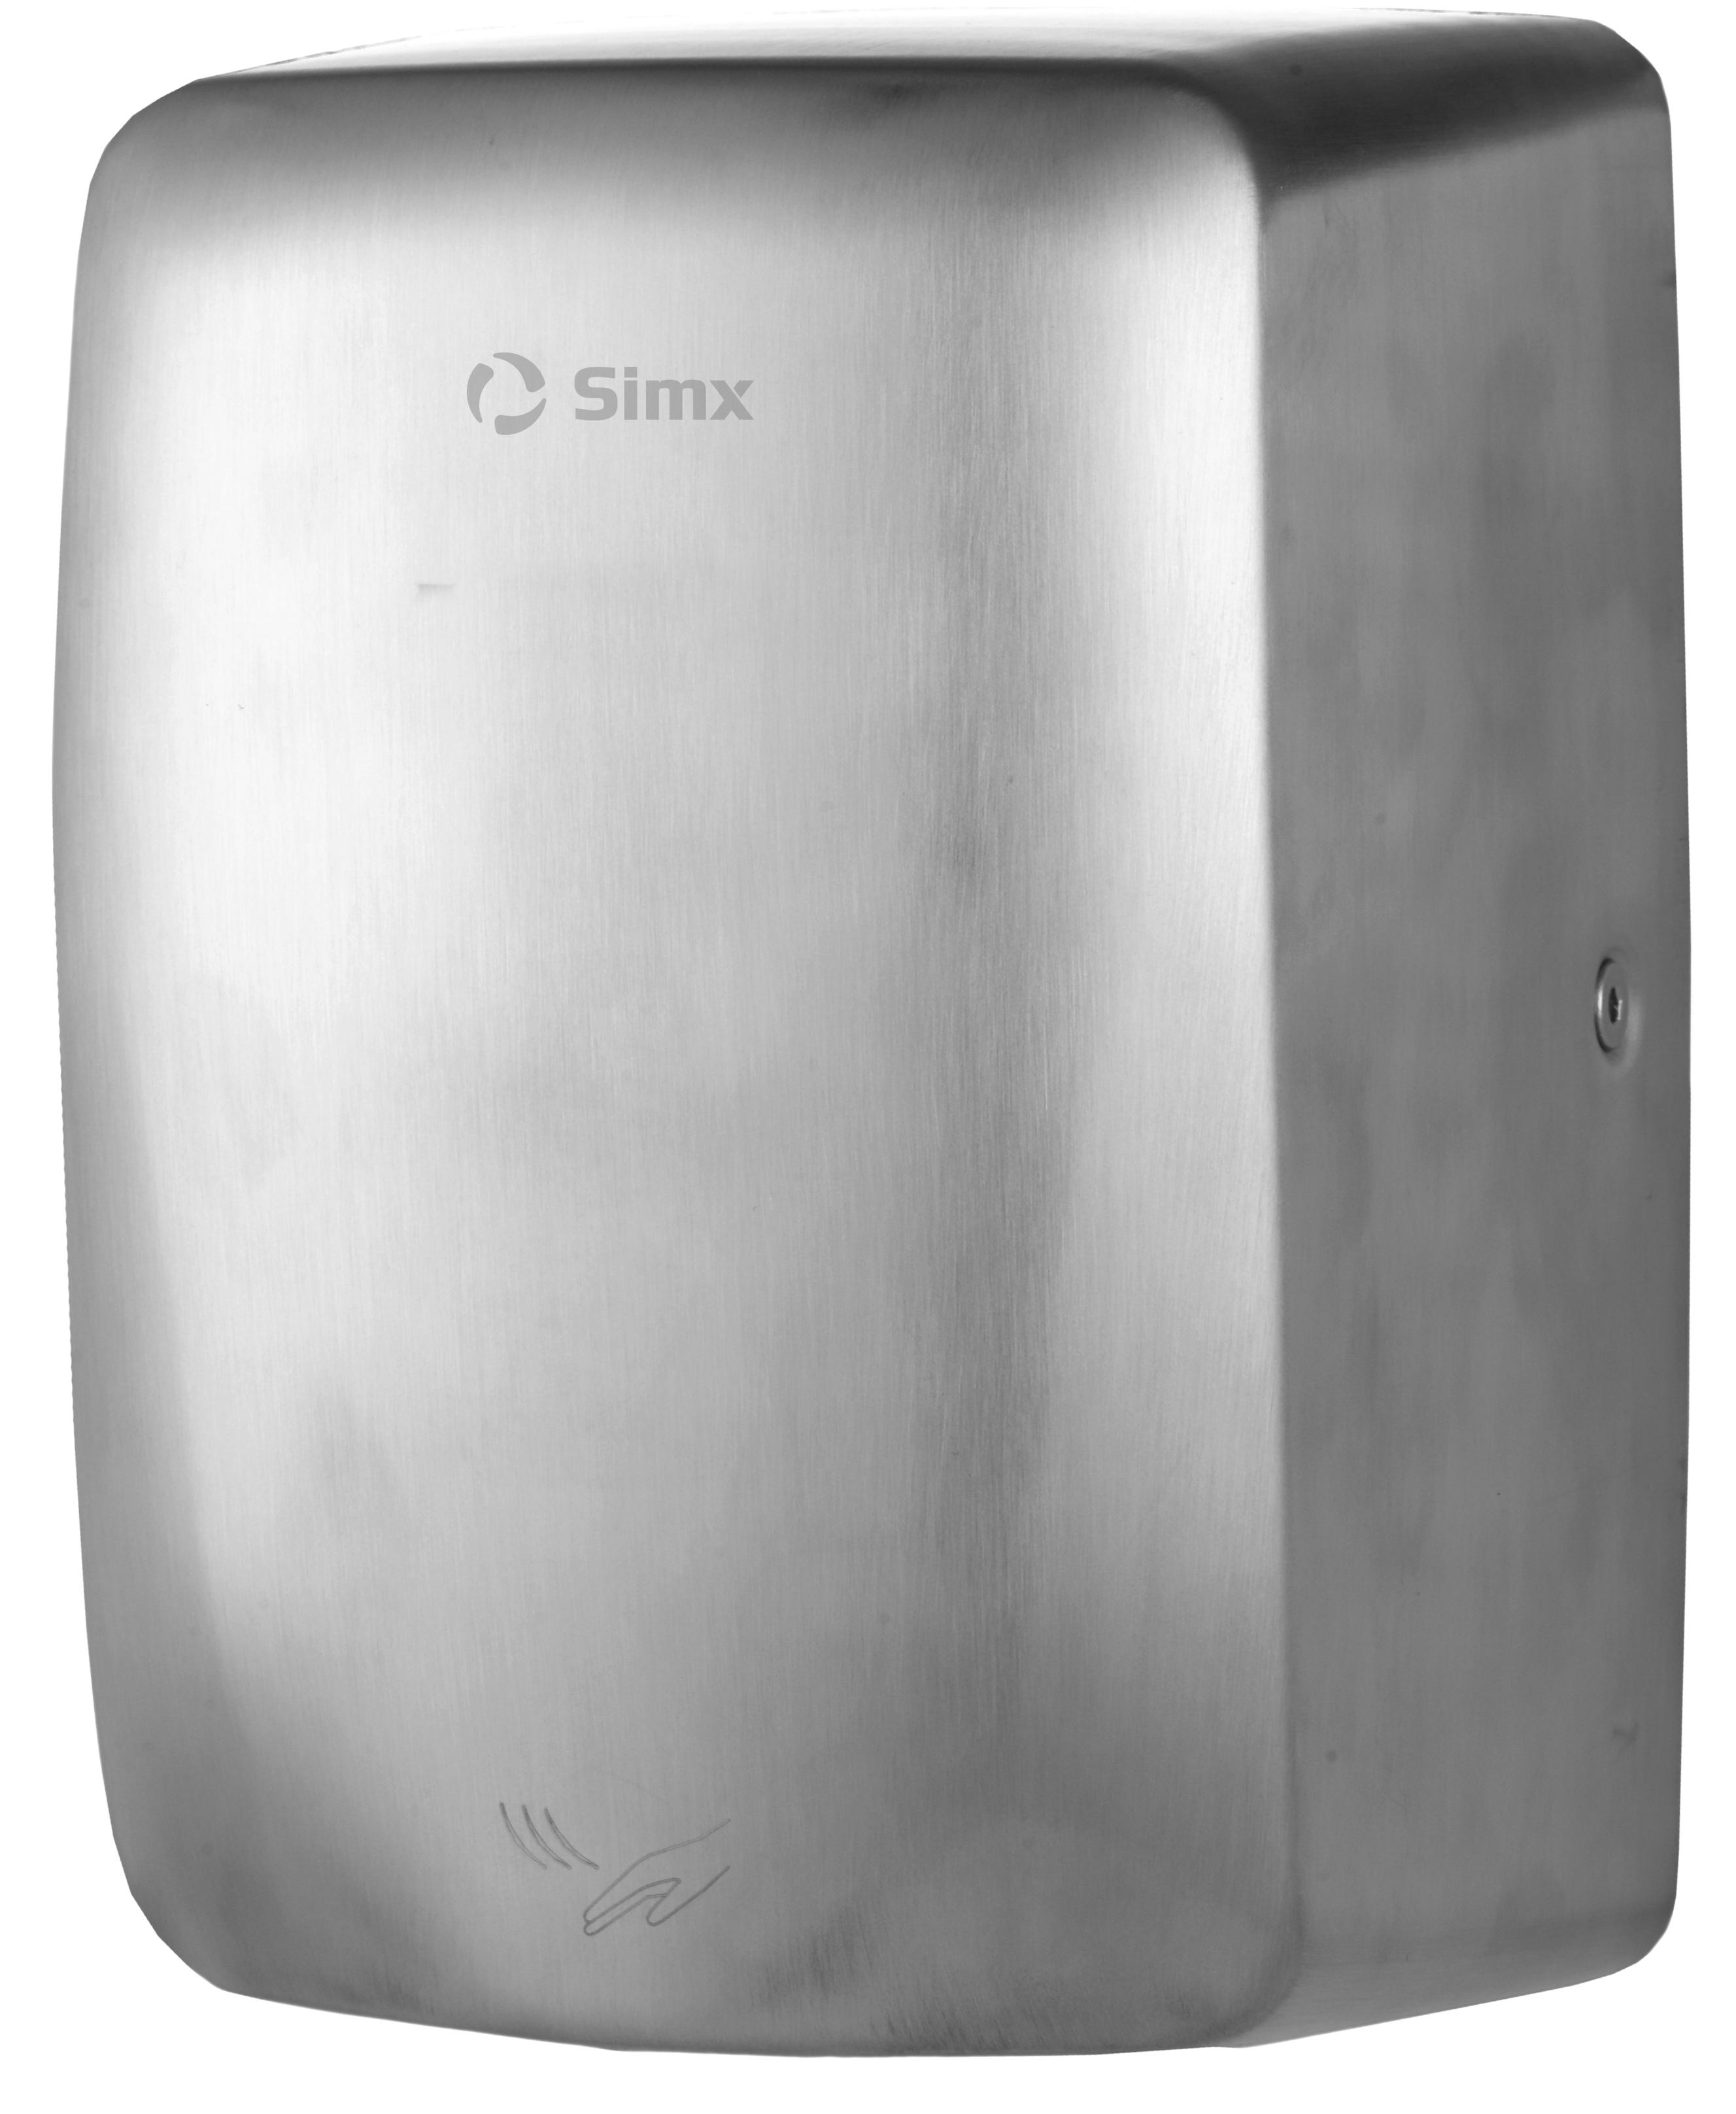 Simx Rapid Dry Stainless Steel Hand Dryer 